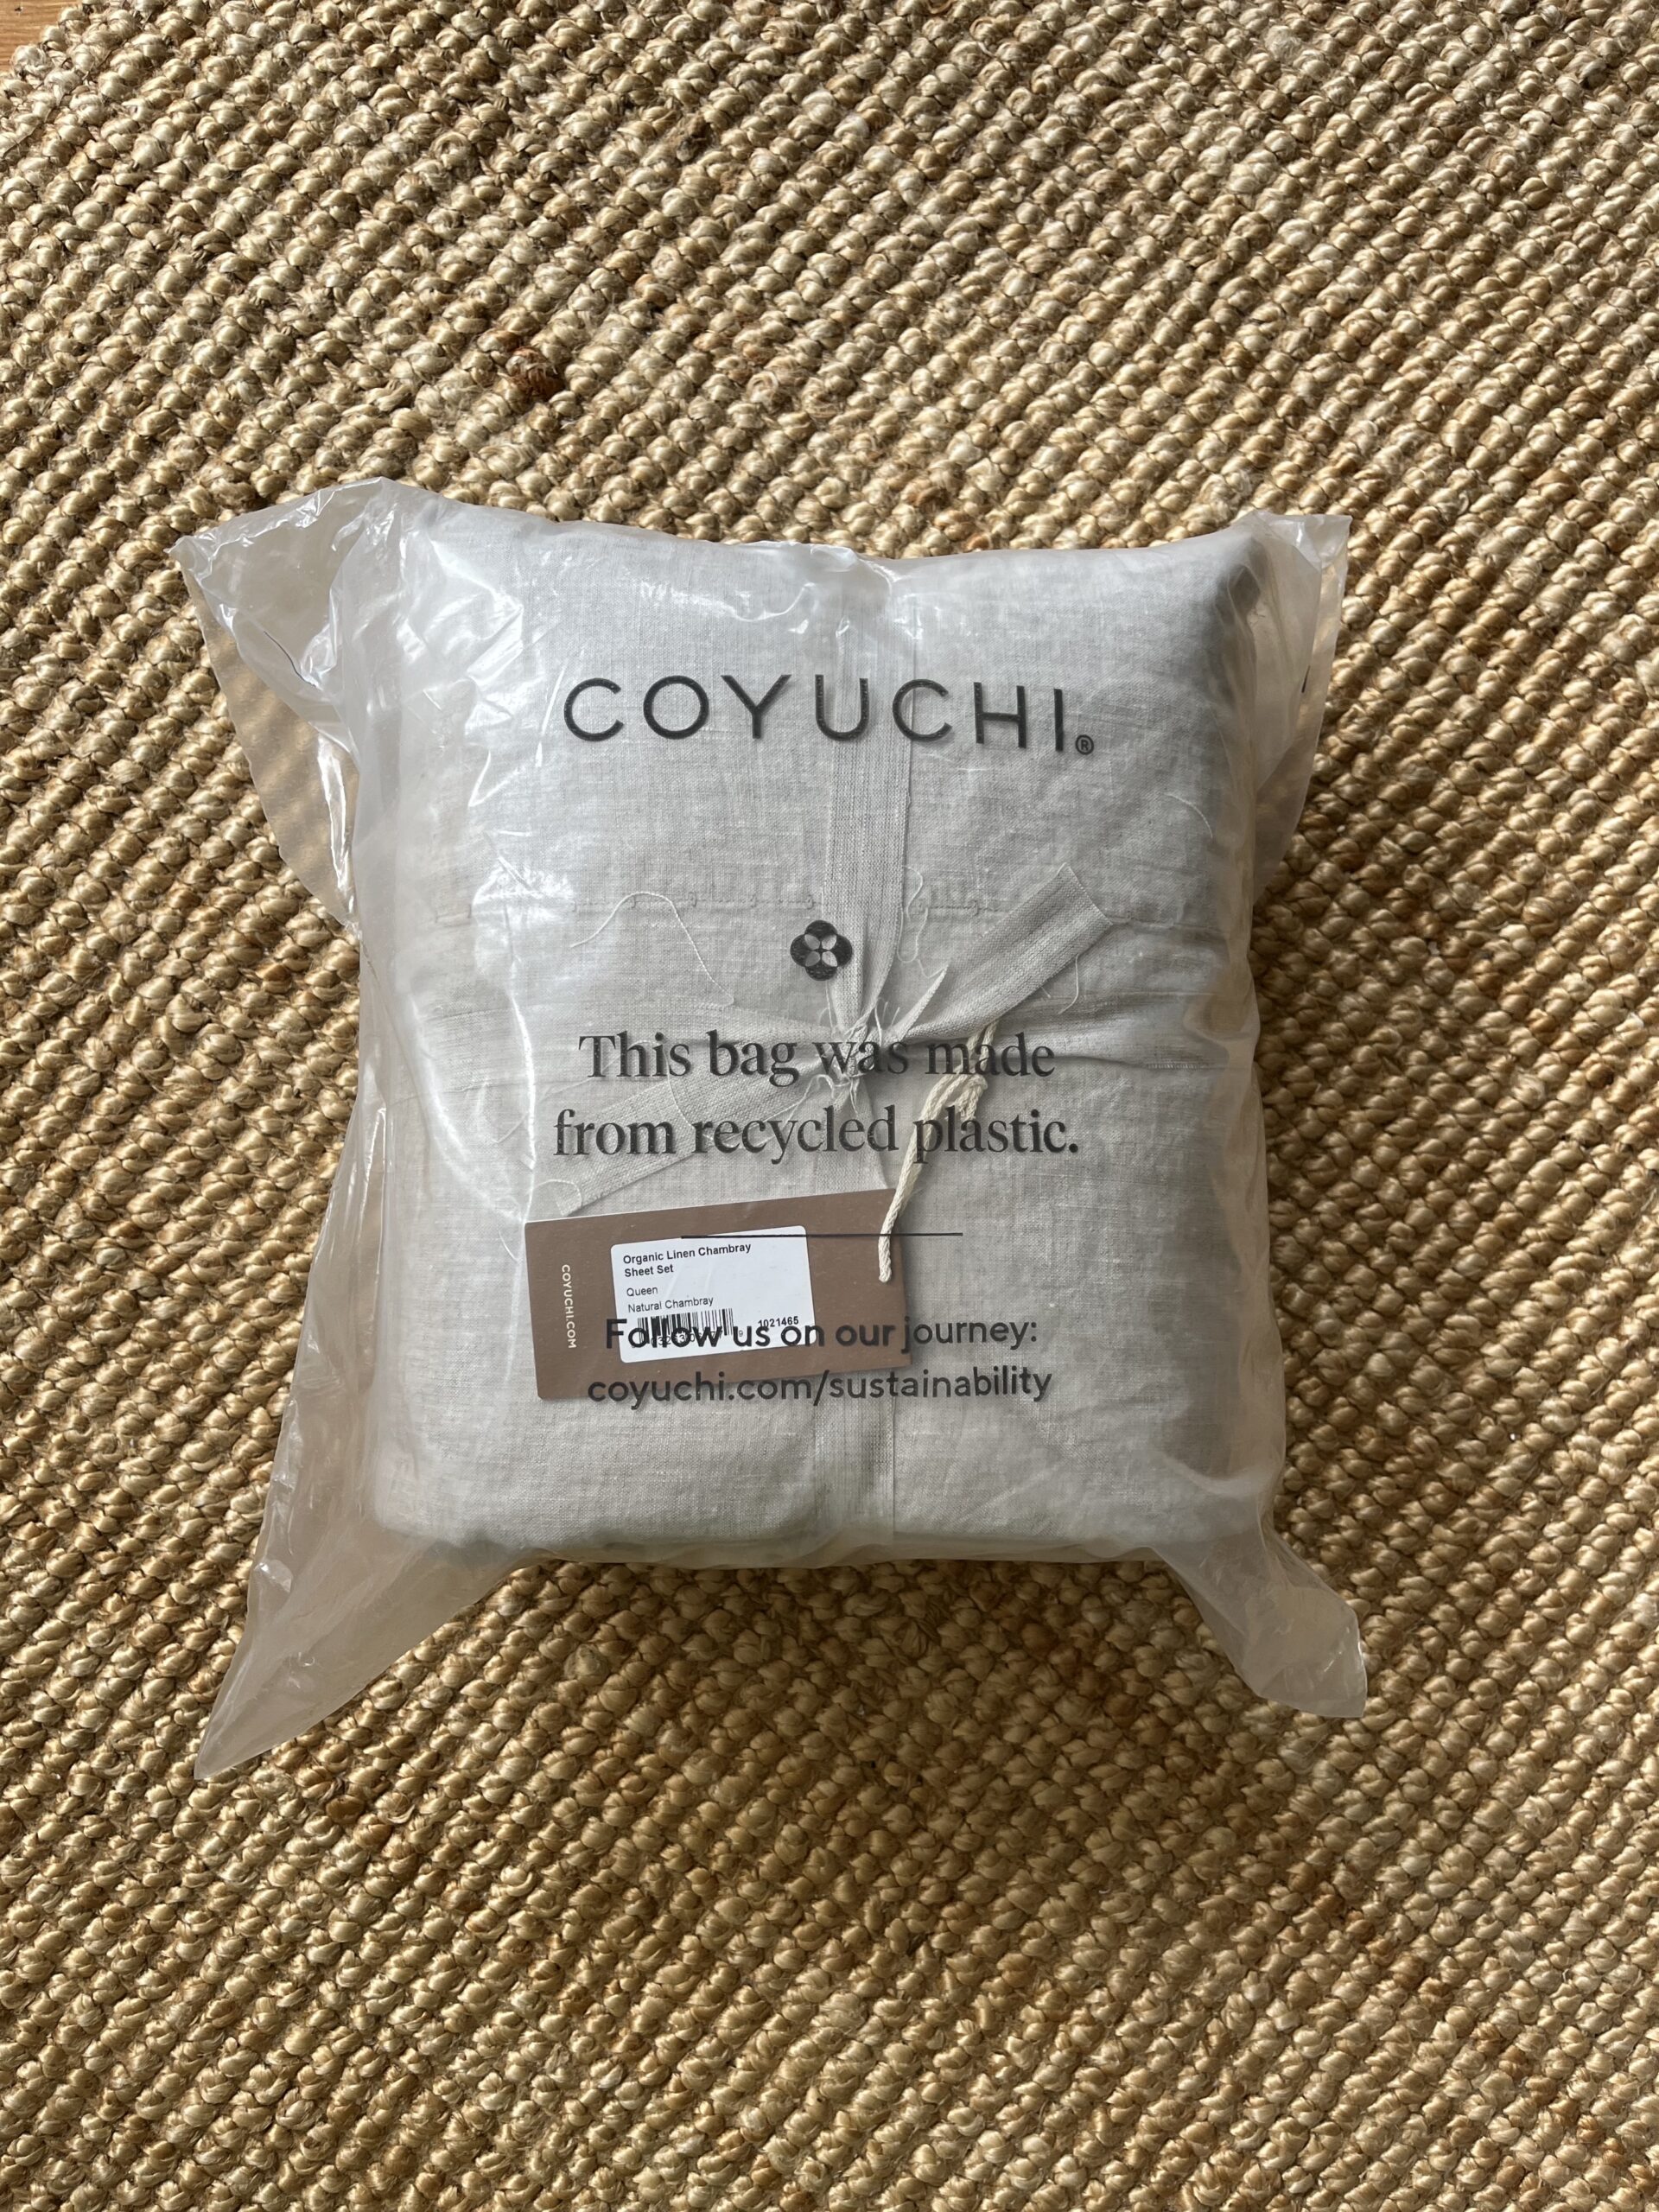 A Coyuchi product in recyclable packaging is placed on a textured mat. The packaging informs that the bag is made from recycled plastic and encourages visiting their website for more sustainability information.